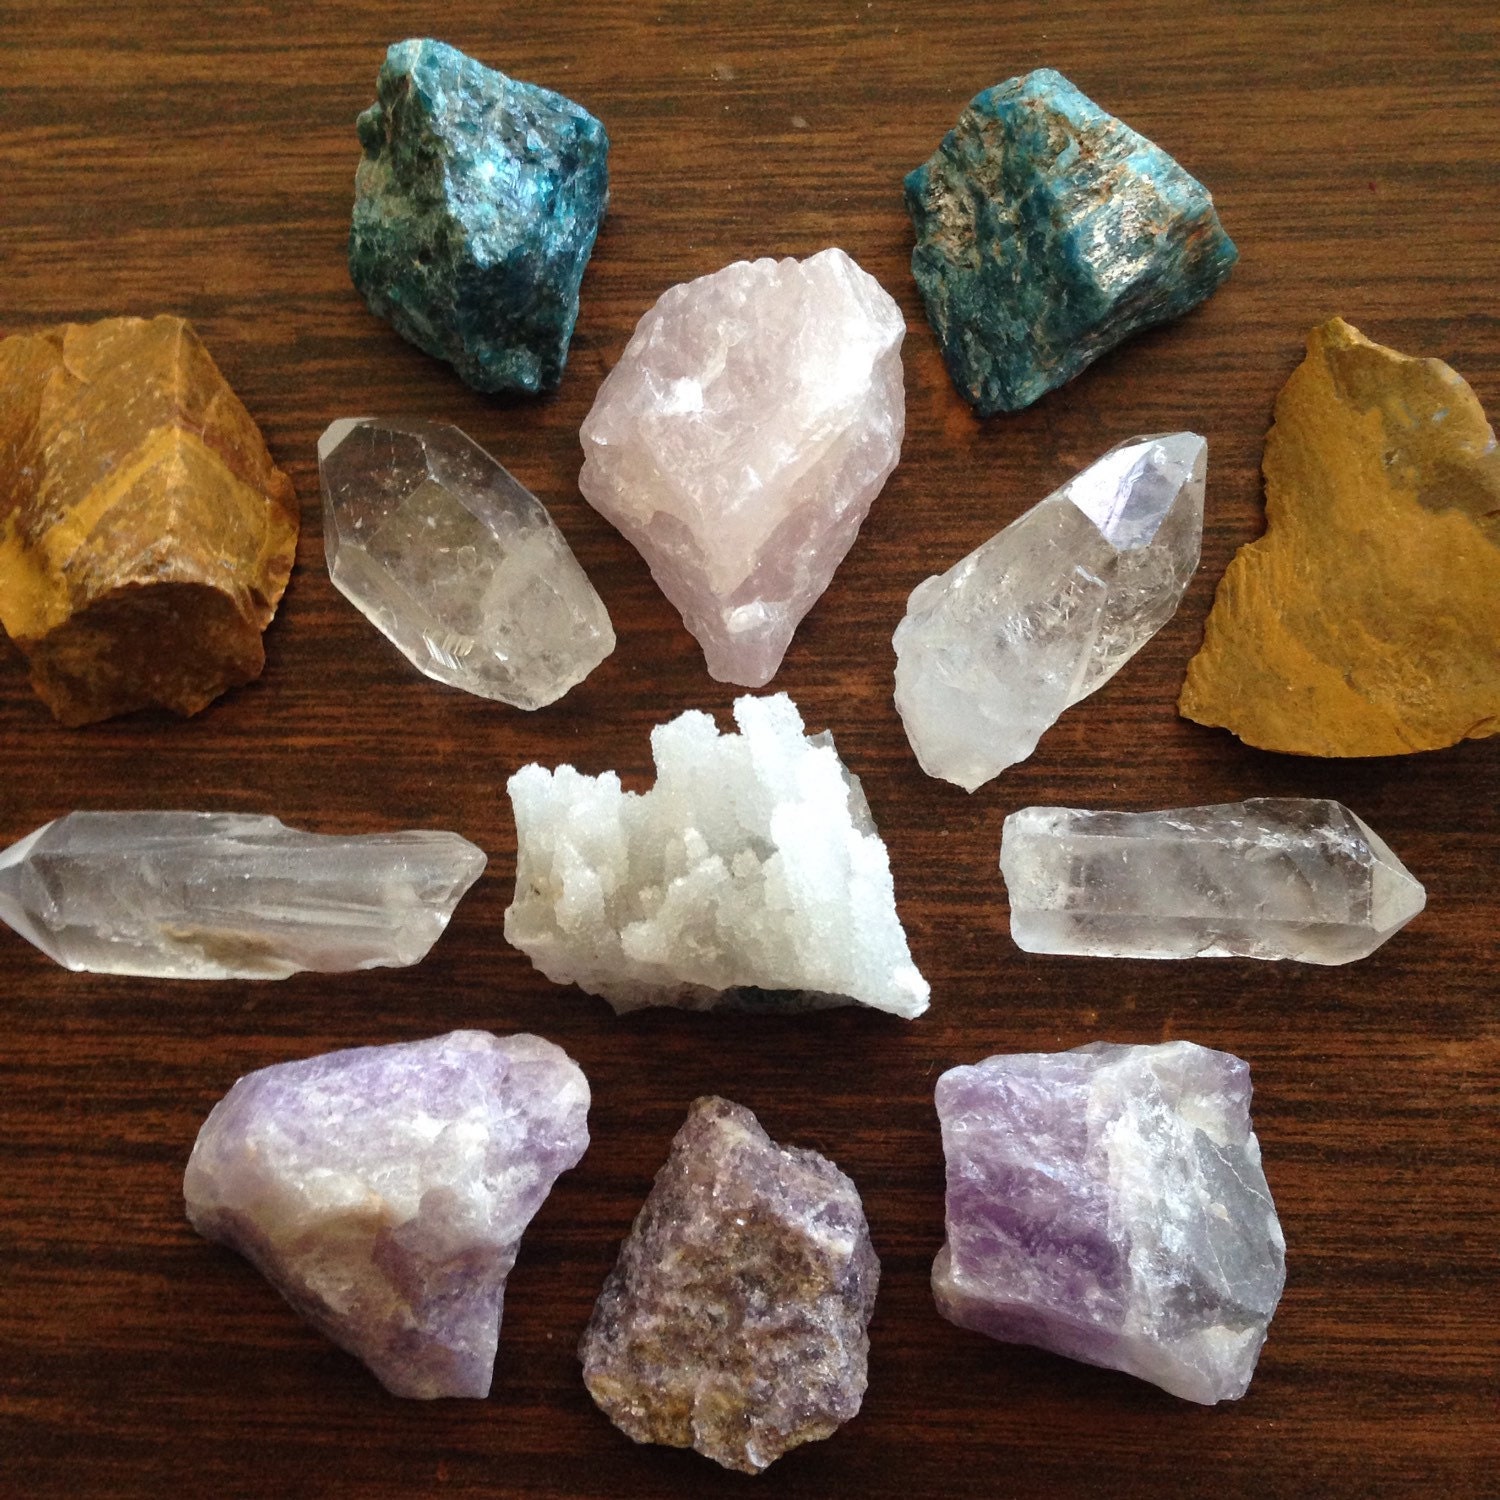 Large Crystal Collection Rough Crystal by crystalsNcreations